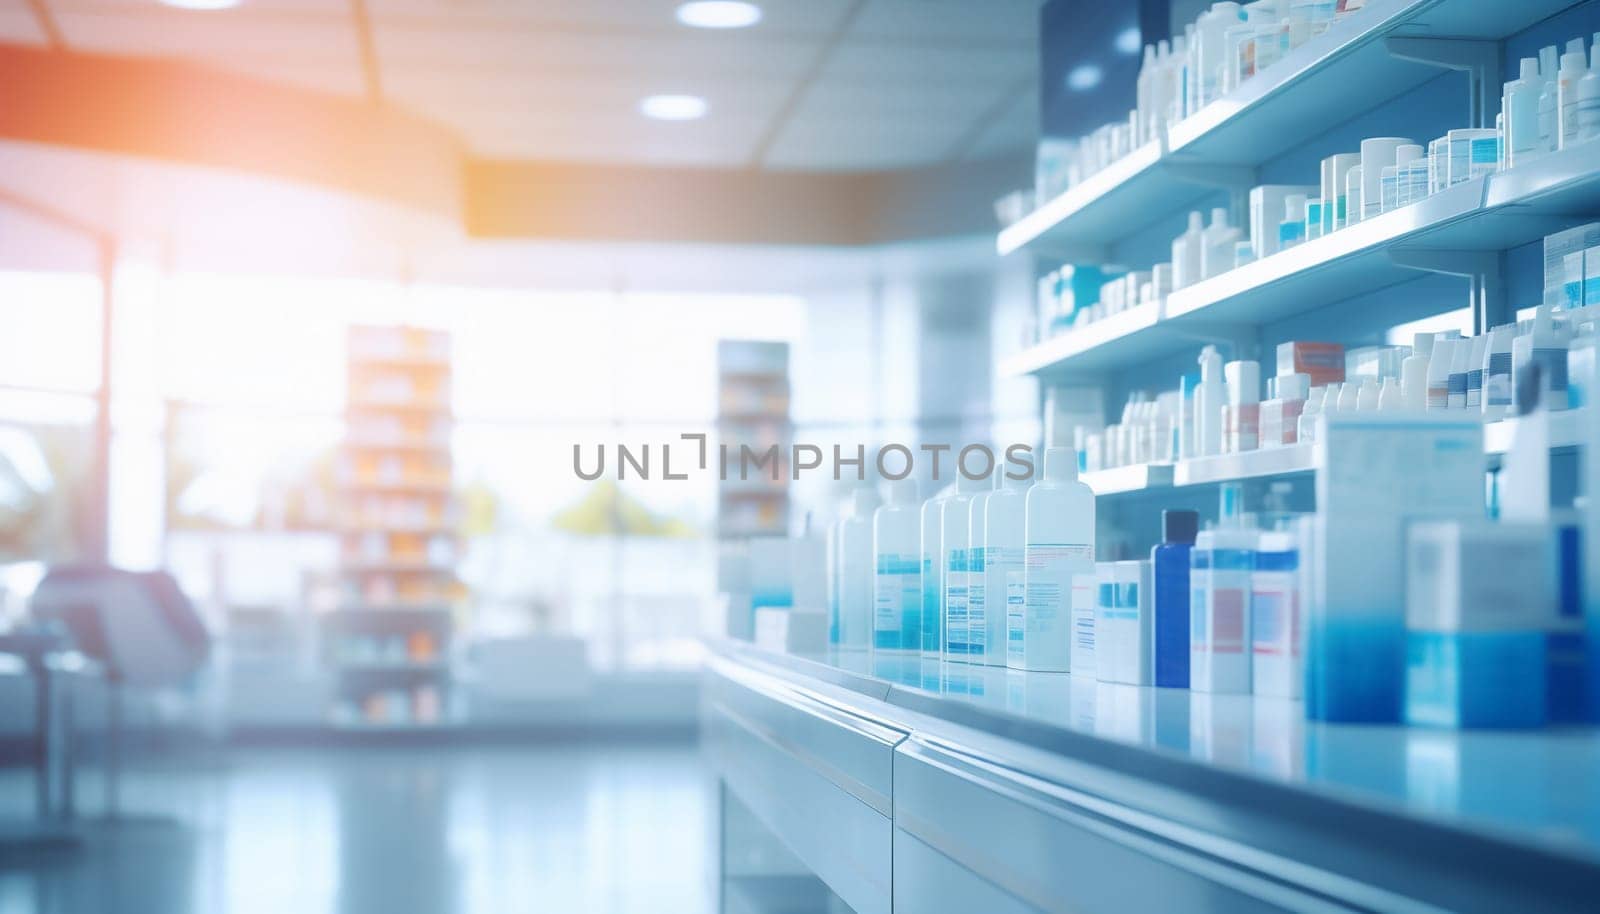 The blurred abstract background of the pharmacy. by Nadtochiy